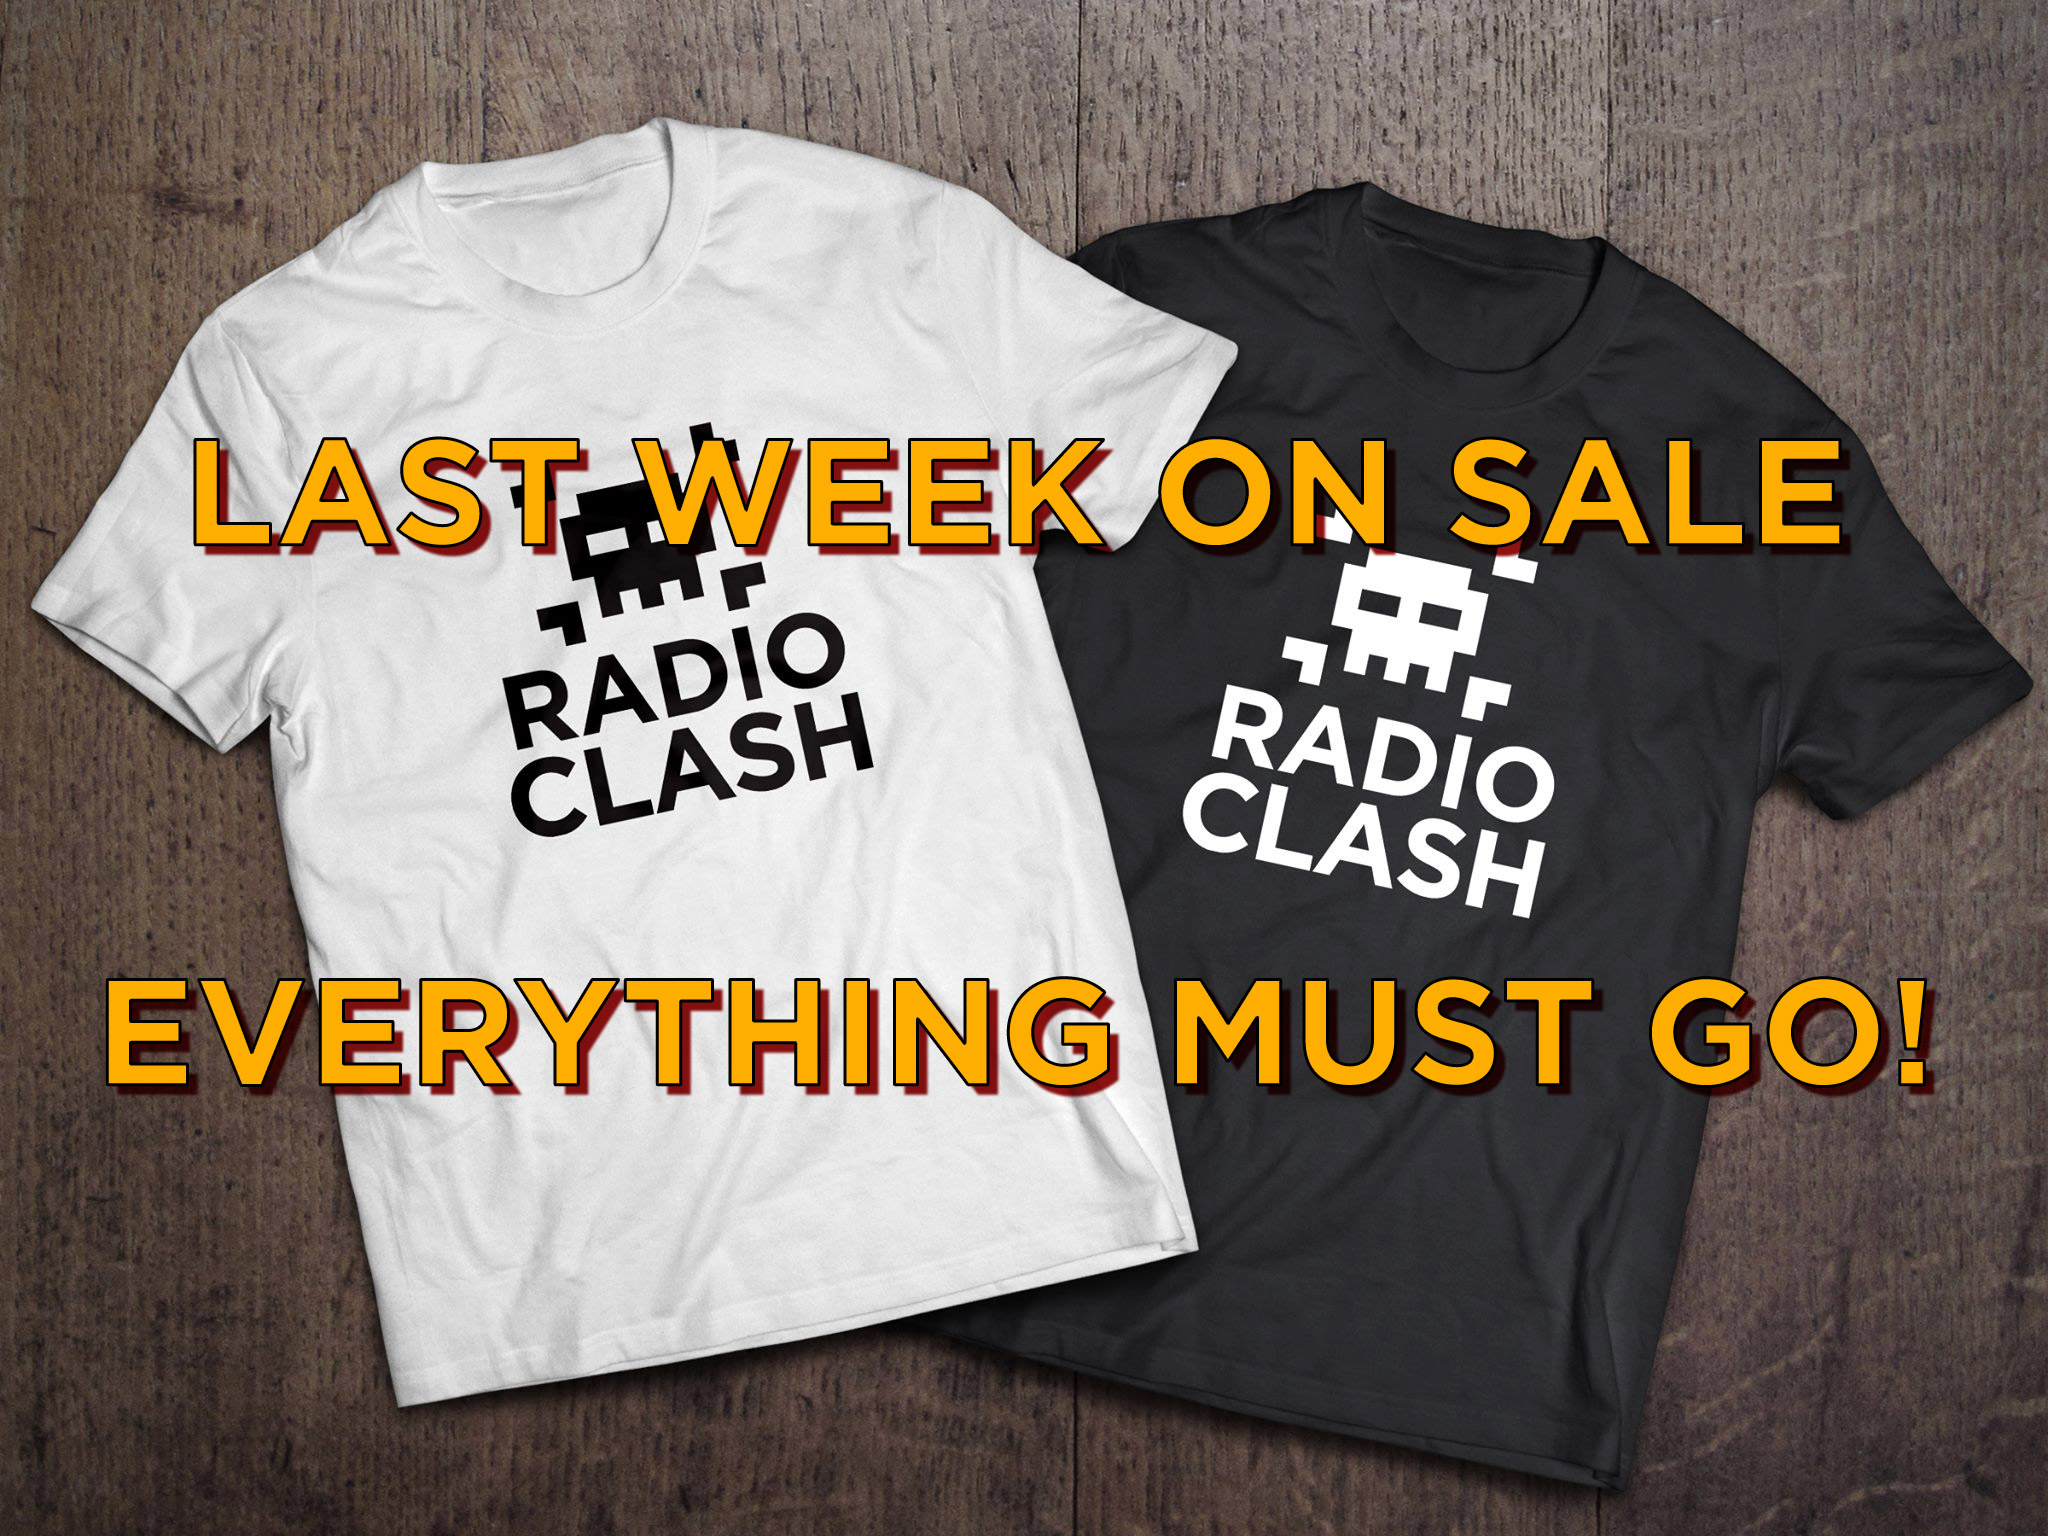 Radio Clash The T-Shirt Is Here!